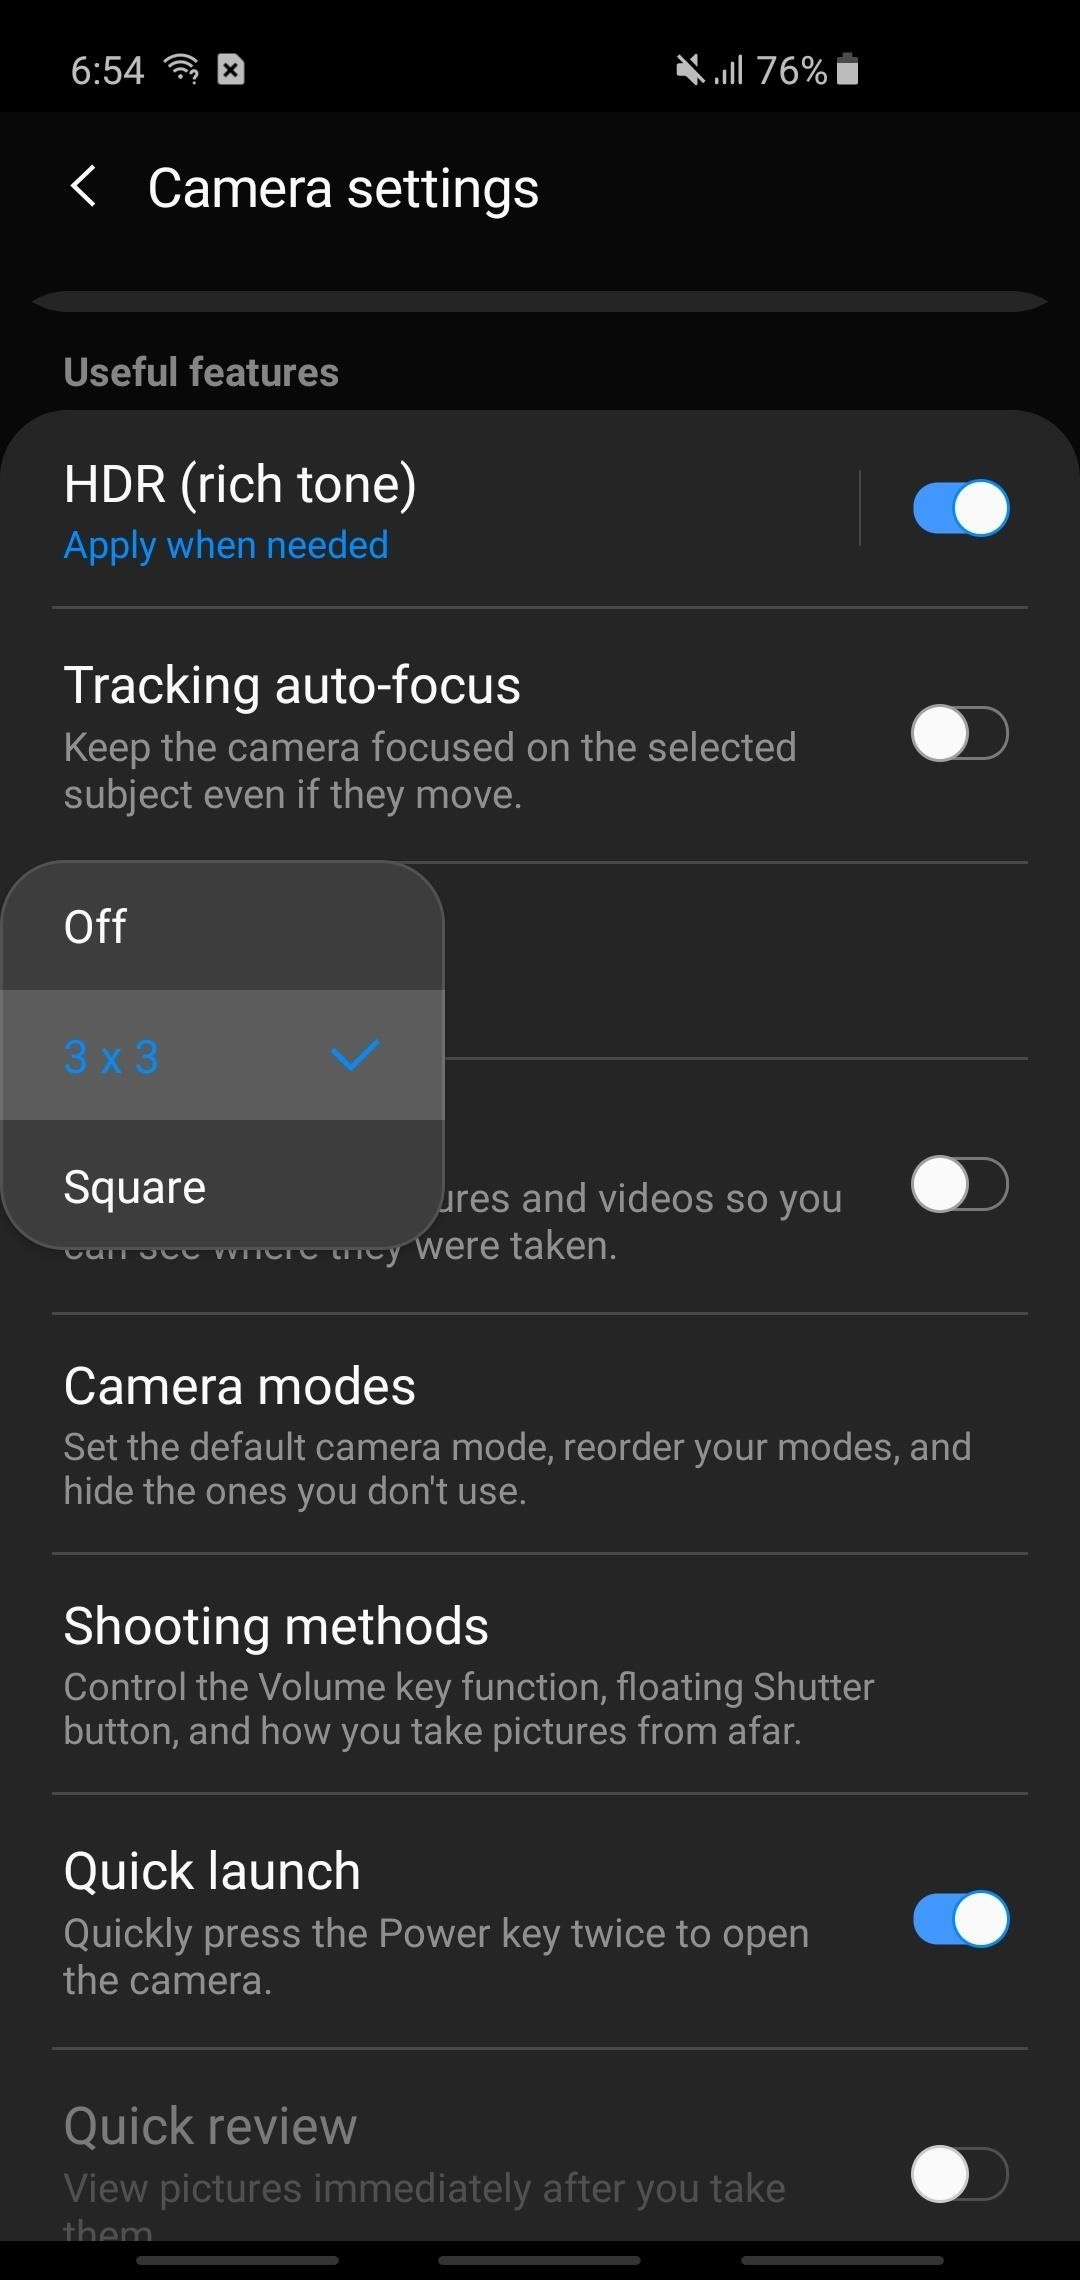 13 Tips for Recording Better Videos on Your Galaxy